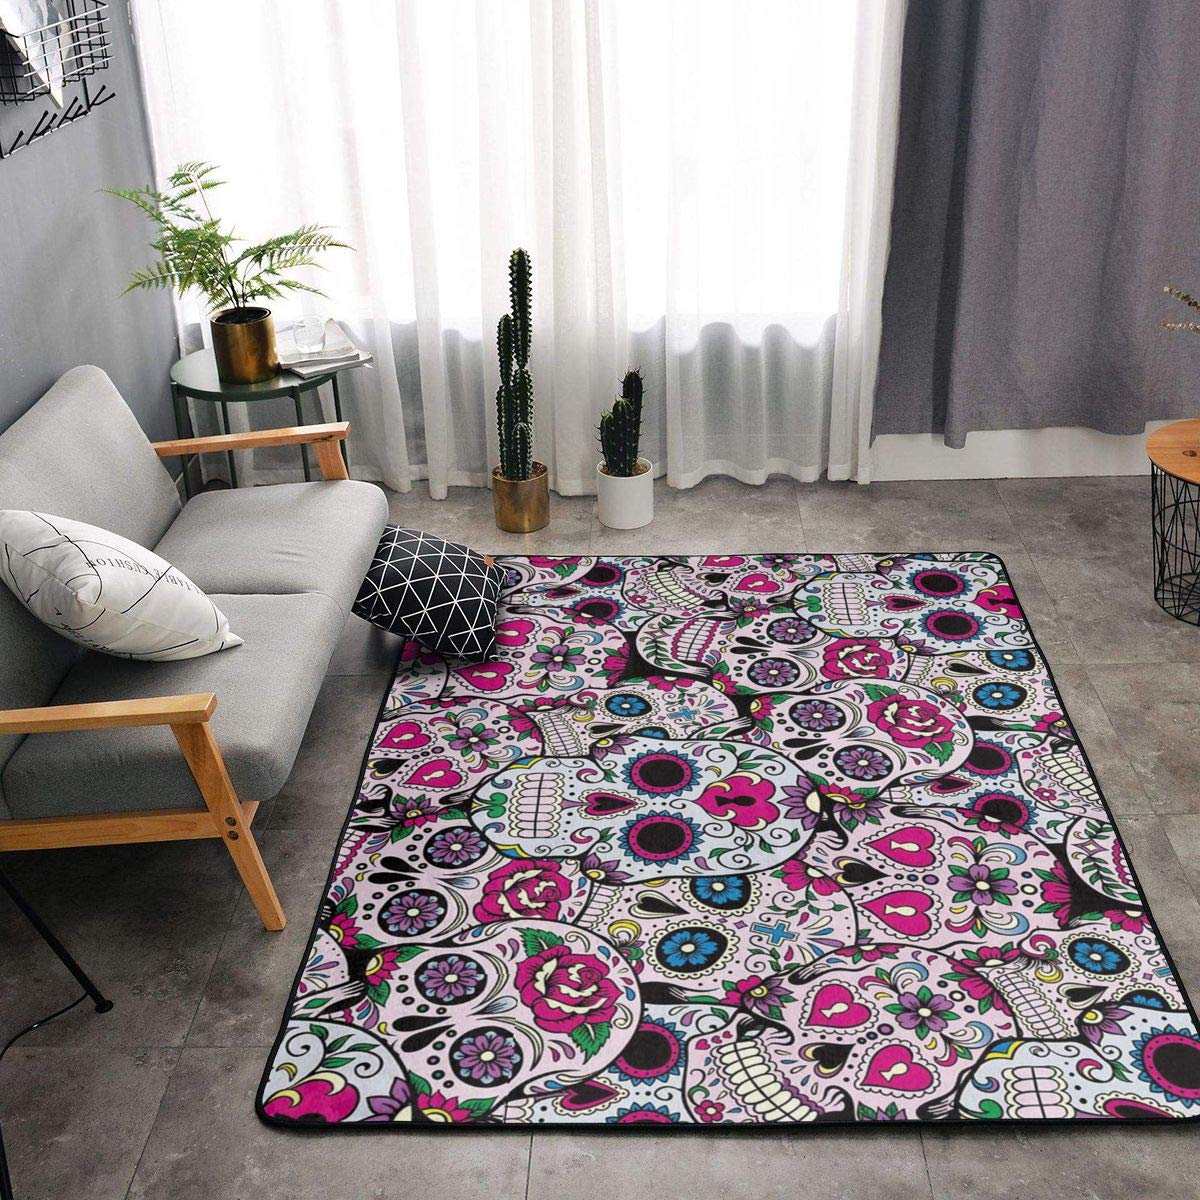 Sugar skull rugs - with 3 sizes